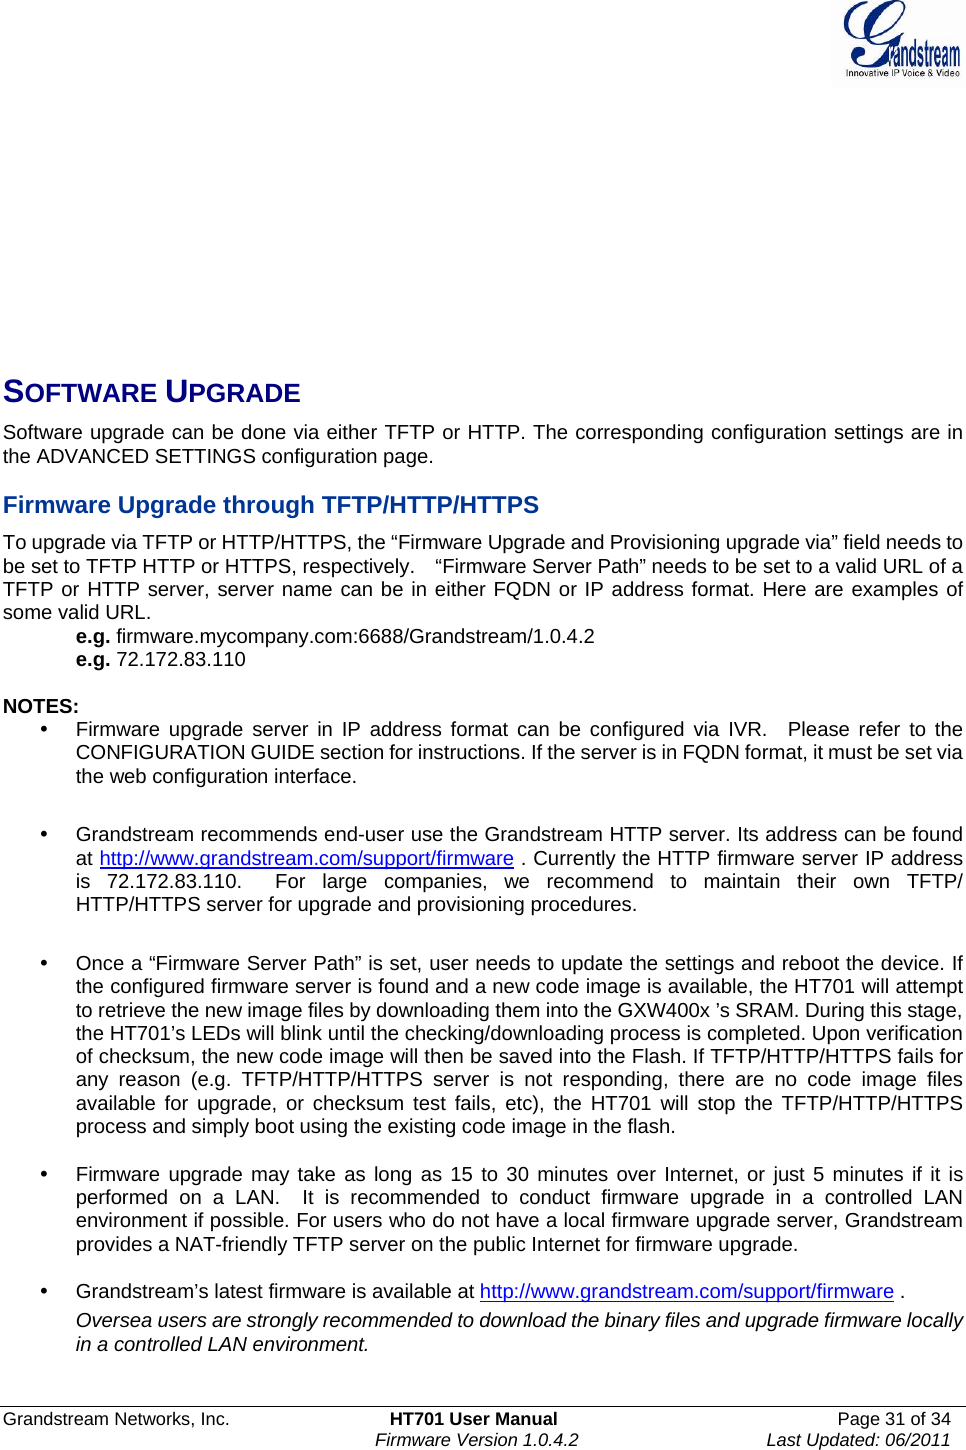  Grandstream Networks, Inc.  HT701 User Manual  Page 31 of 34     Firmware Version 1.0.4.2  Last Updated: 06/2011           SOFTWARE UPGRADE Software upgrade can be done via either TFTP or HTTP. The corresponding configuration settings are in the ADVANCED SETTINGS configuration page.   Firmware Upgrade through TFTP/HTTP/HTTPS To upgrade via TFTP or HTTP/HTTPS, the “Firmware Upgrade and Provisioning upgrade via” field needs to be set to TFTP HTTP or HTTPS, respectively.    “Firmware Server Path” needs to be set to a valid URL of a TFTP or HTTP server, server name can be in either FQDN or IP address format. Here are examples of some valid URL.   e.g. firmware.mycompany.com:6688/Grandstream/1.0.4.2 e.g. 72.172.83.110   NOTES: y  Firmware upgrade server in IP address format can be configured via IVR.  Please refer to the CONFIGURATION GUIDE section for instructions. If the server is in FQDN format, it must be set via the web configuration interface.  y  Grandstream recommends end-user use the Grandstream HTTP server. Its address can be found at http://www.grandstream.com/support/firmware . Currently the HTTP firmware server IP address is 72.172.83.110.  For large companies, we recommend to maintain their own TFTP/ HTTP/HTTPS server for upgrade and provisioning procedures.  y  Once a “Firmware Server Path” is set, user needs to update the settings and reboot the device. If the configured firmware server is found and a new code image is available, the HT701 will attempt to retrieve the new image files by downloading them into the GXW400x ’s SRAM. During this stage, the HT701’s LEDs will blink until the checking/downloading process is completed. Upon verification of checksum, the new code image will then be saved into the Flash. If TFTP/HTTP/HTTPS fails for any reason (e.g. TFTP/HTTP/HTTPS server is not responding, there are no code image files available for upgrade, or checksum test fails, etc), the HT701 will stop the TFTP/HTTP/HTTPS process and simply boot using the existing code image in the flash.   y  Firmware upgrade may take as long as 15 to 30 minutes over Internet, or just 5 minutes if it is performed on a LAN.  It is recommended to conduct firmware upgrade in a controlled LAN environment if possible. For users who do not have a local firmware upgrade server, Grandstream provides a NAT-friendly TFTP server on the public Internet for firmware upgrade. y  Grandstream’s latest firmware is available at http://www.grandstream.com/support/firmware .   Oversea users are strongly recommended to download the binary files and upgrade firmware locally in a controlled LAN environment.    